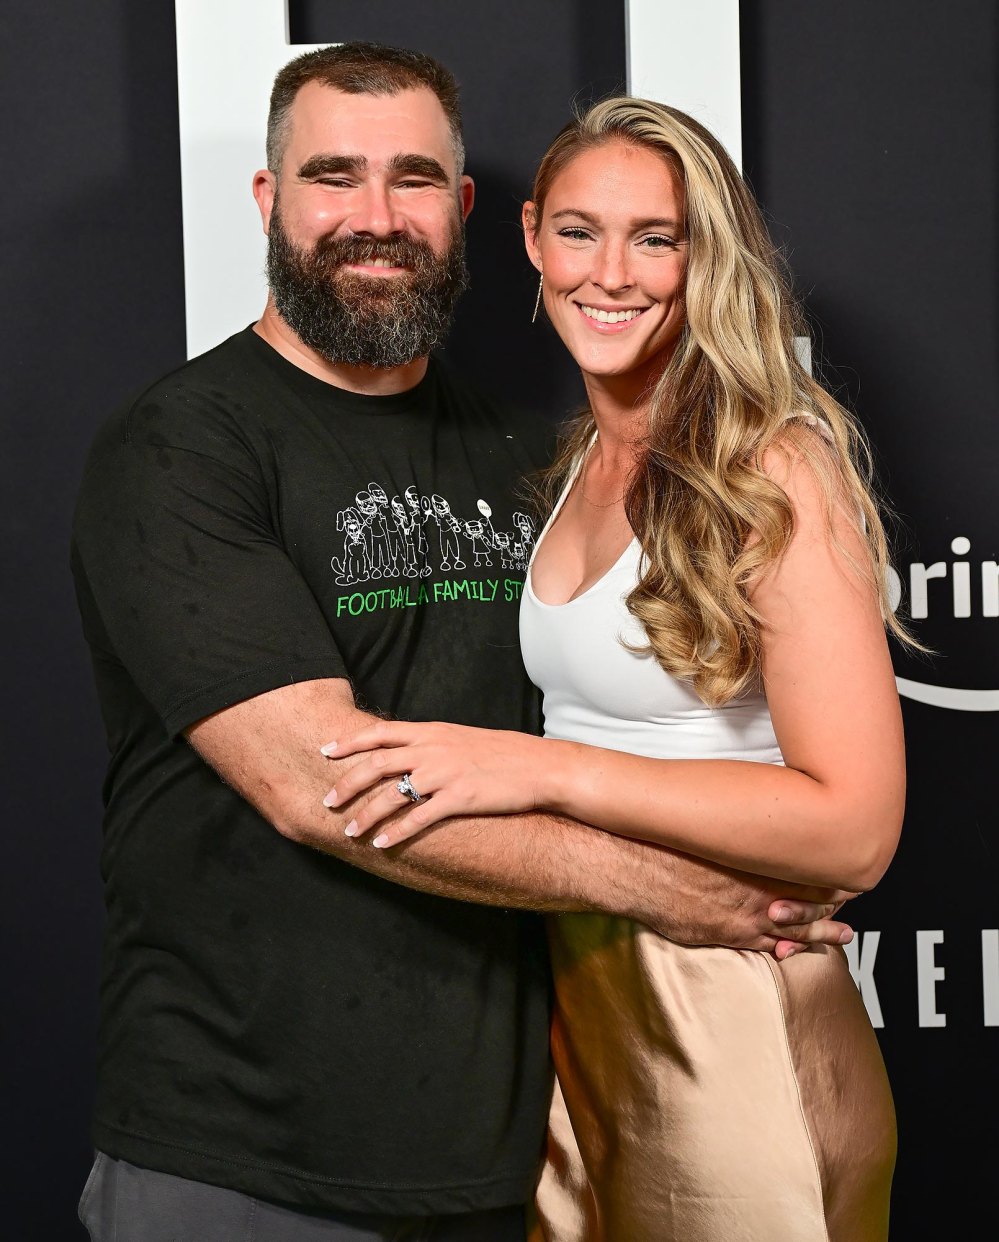 Jason Kelce and Kylie Kelce Hang Out at Bar While Visiting the Jersey Shore Over the Weekend